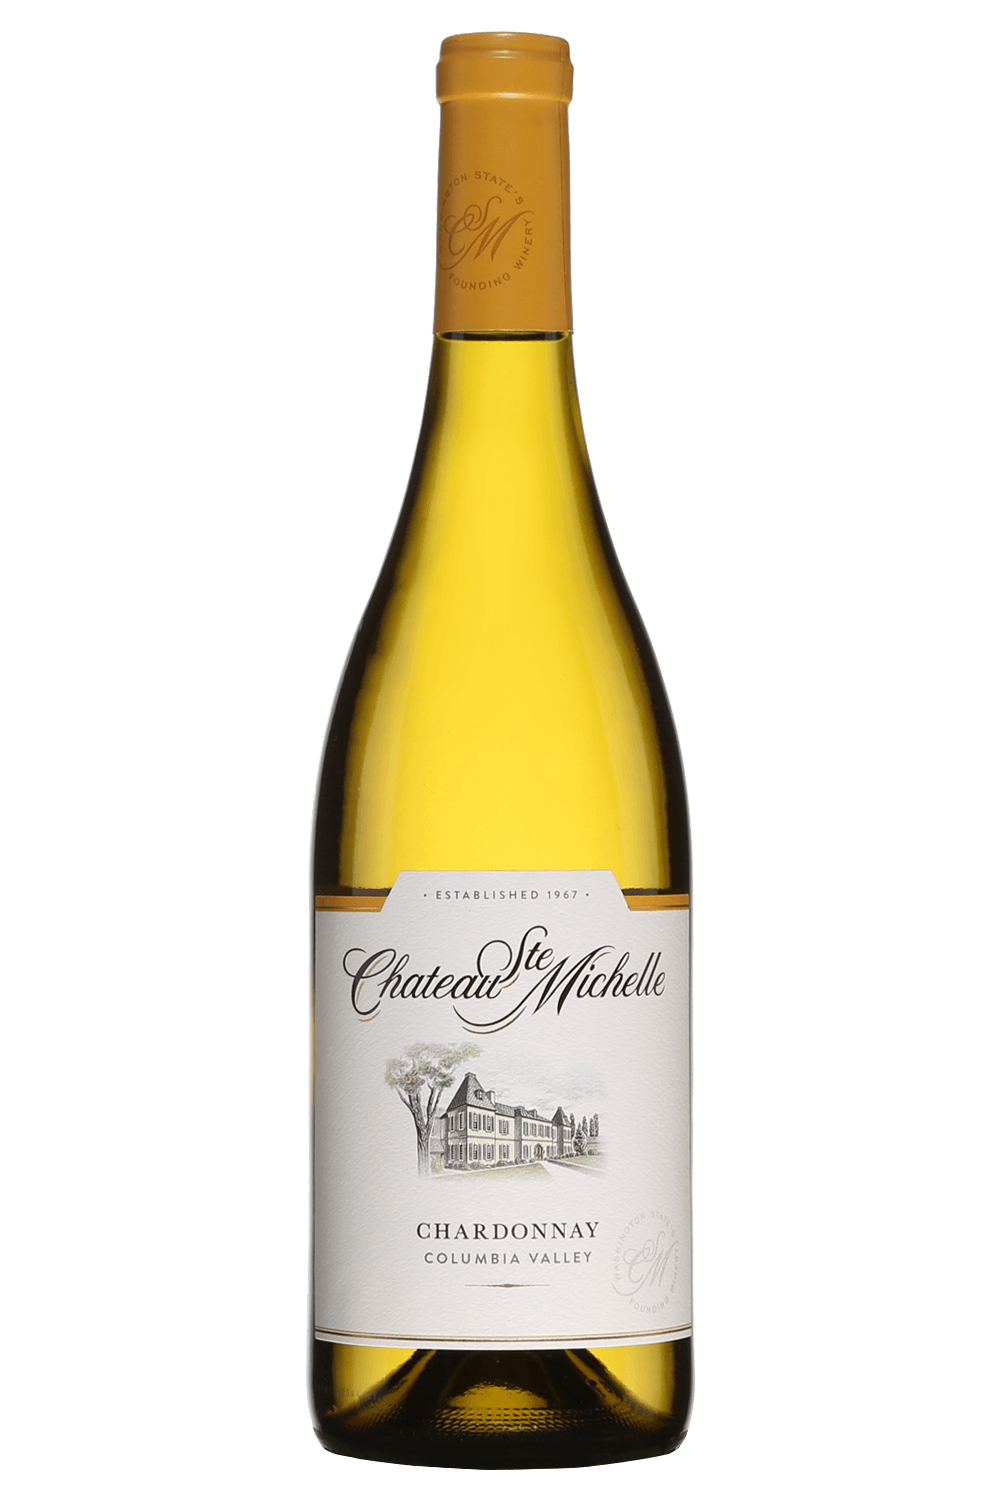 Chateau Ste Michelle Chardonnay Columbia Valley AVA chateau ste michelle sauvignon blanc columbia valley ava